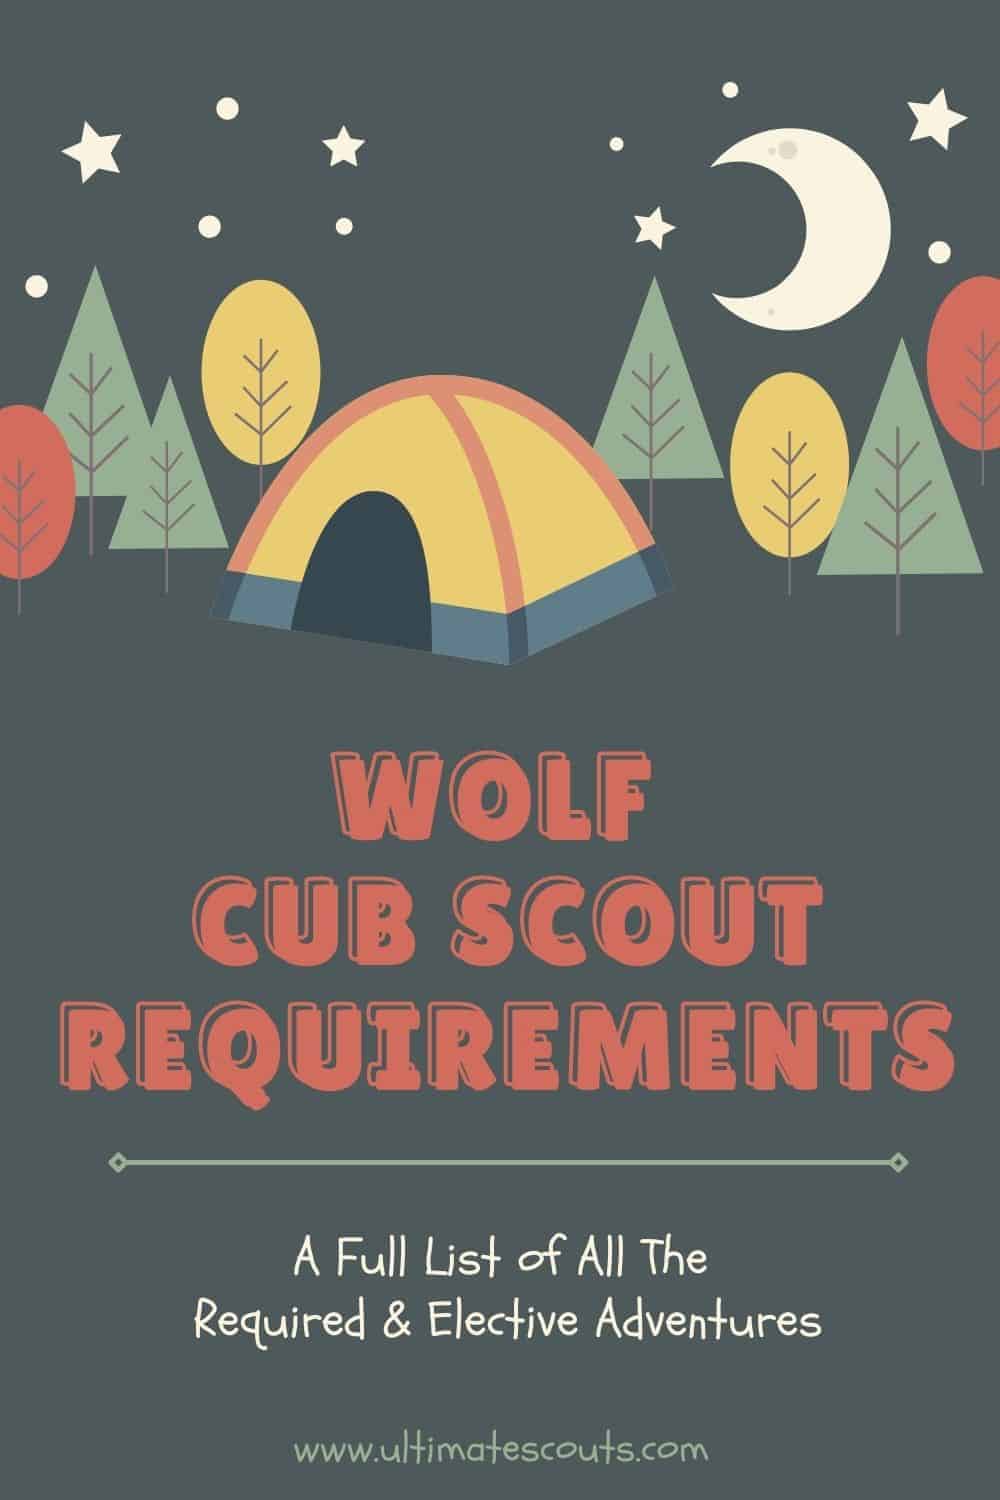 cub scout wolf requirements